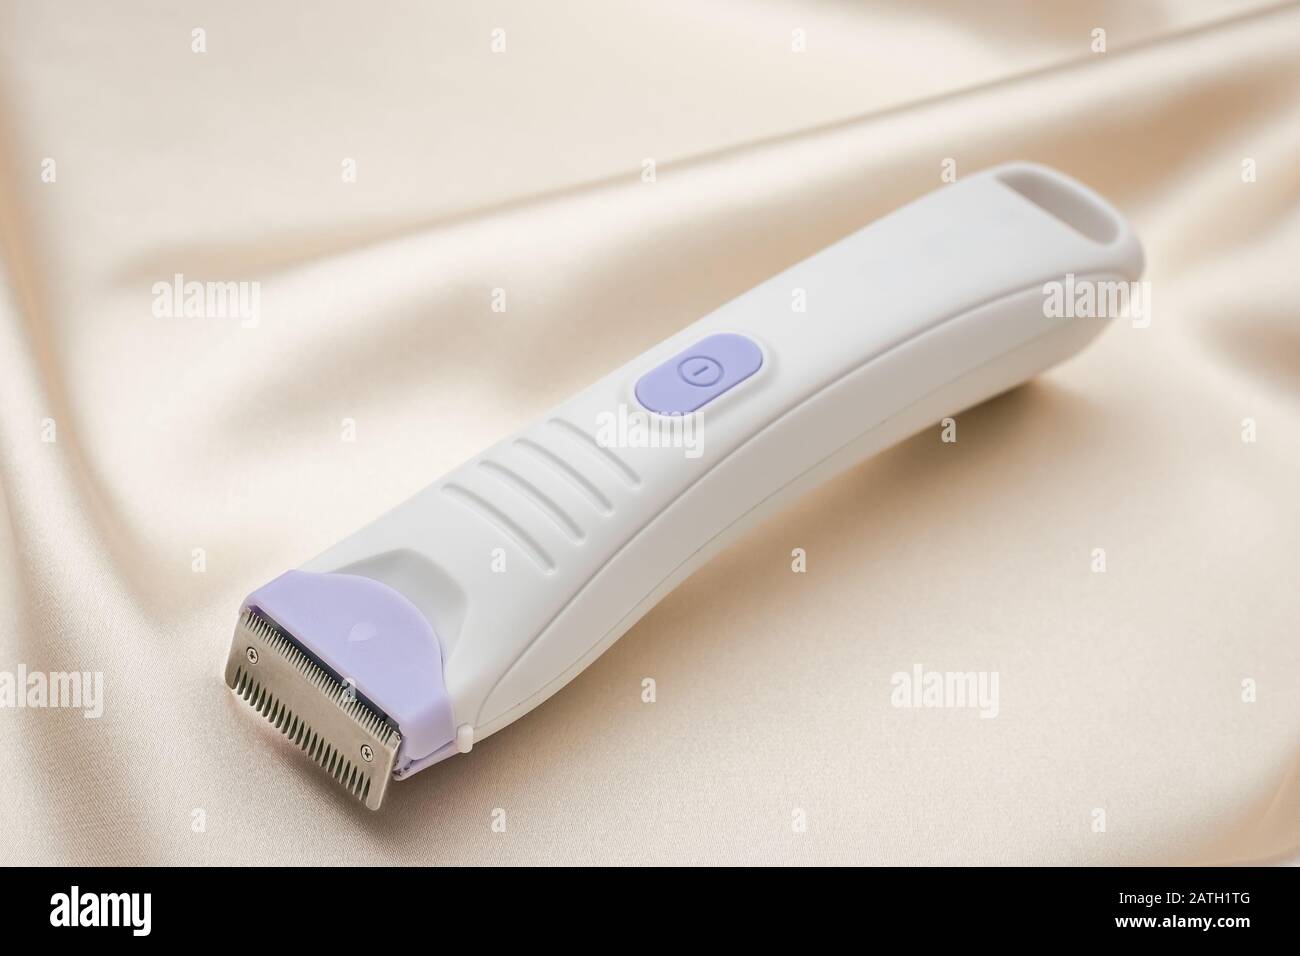 Electric hair trimmer. Personal hygiene item for women. Hair cutting  accessory with metal blade on light fabric background Stock Photo - Alamy